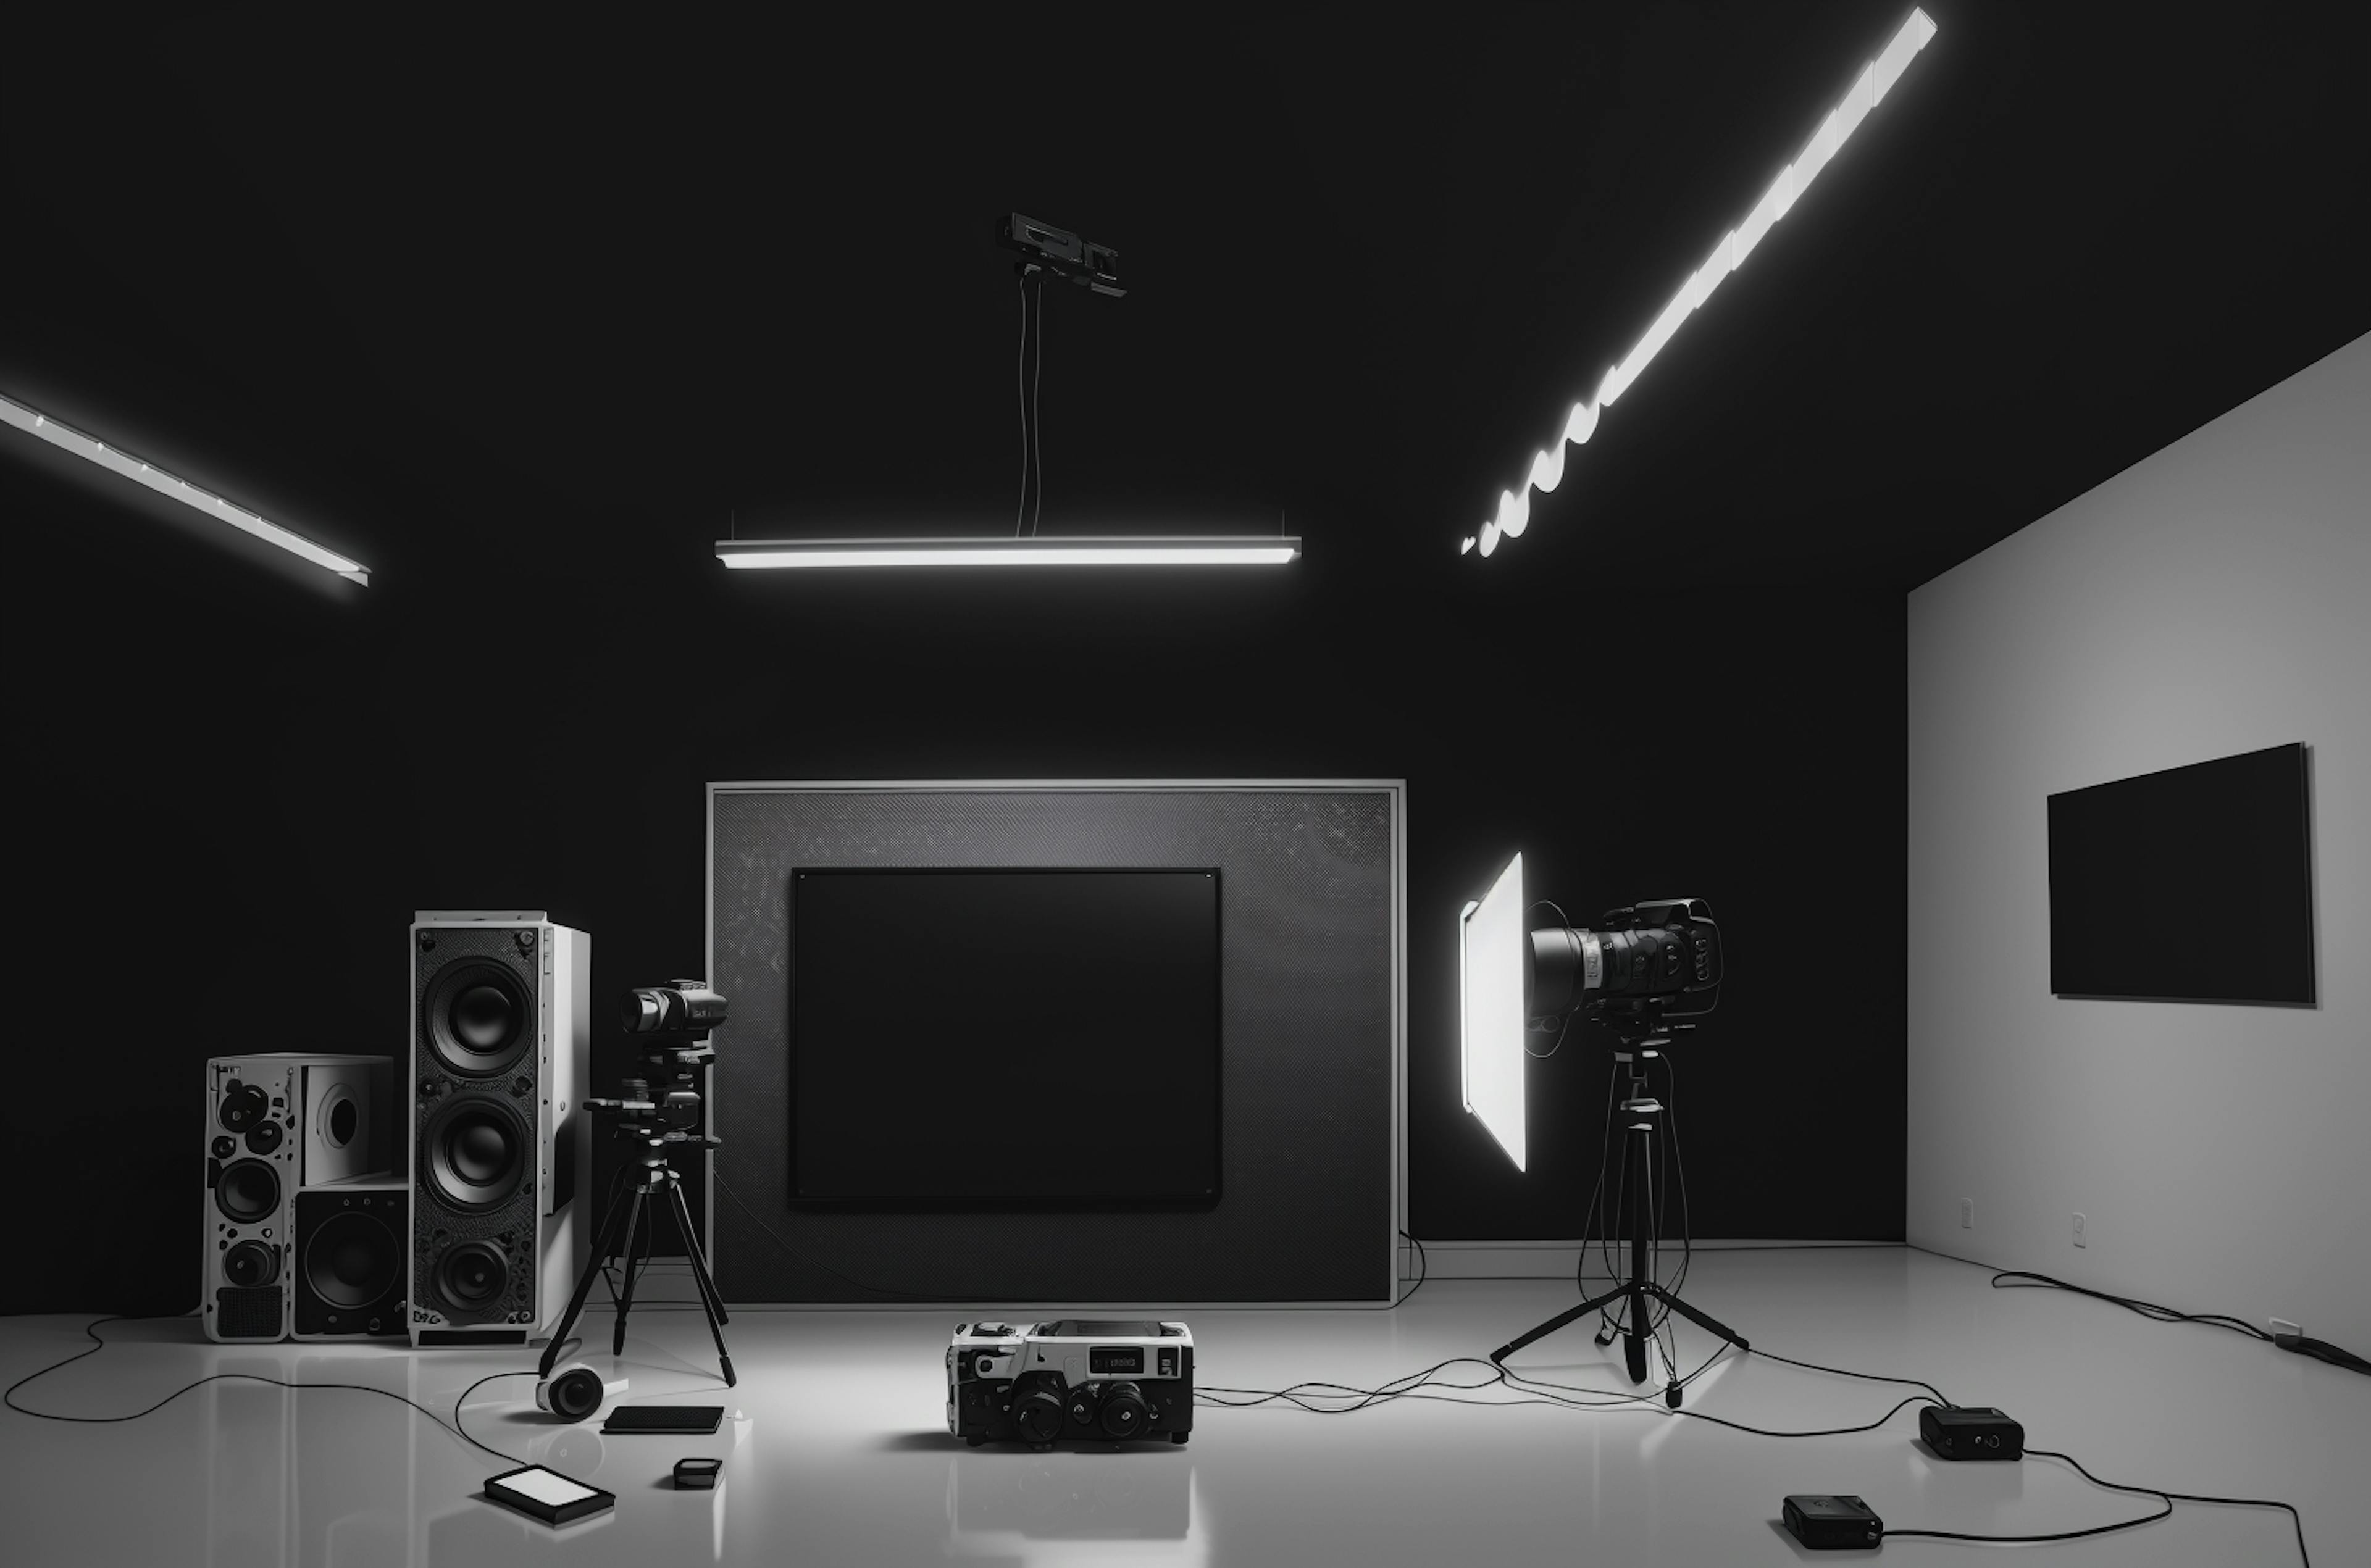 image of a dark studio with lights and camera equipment